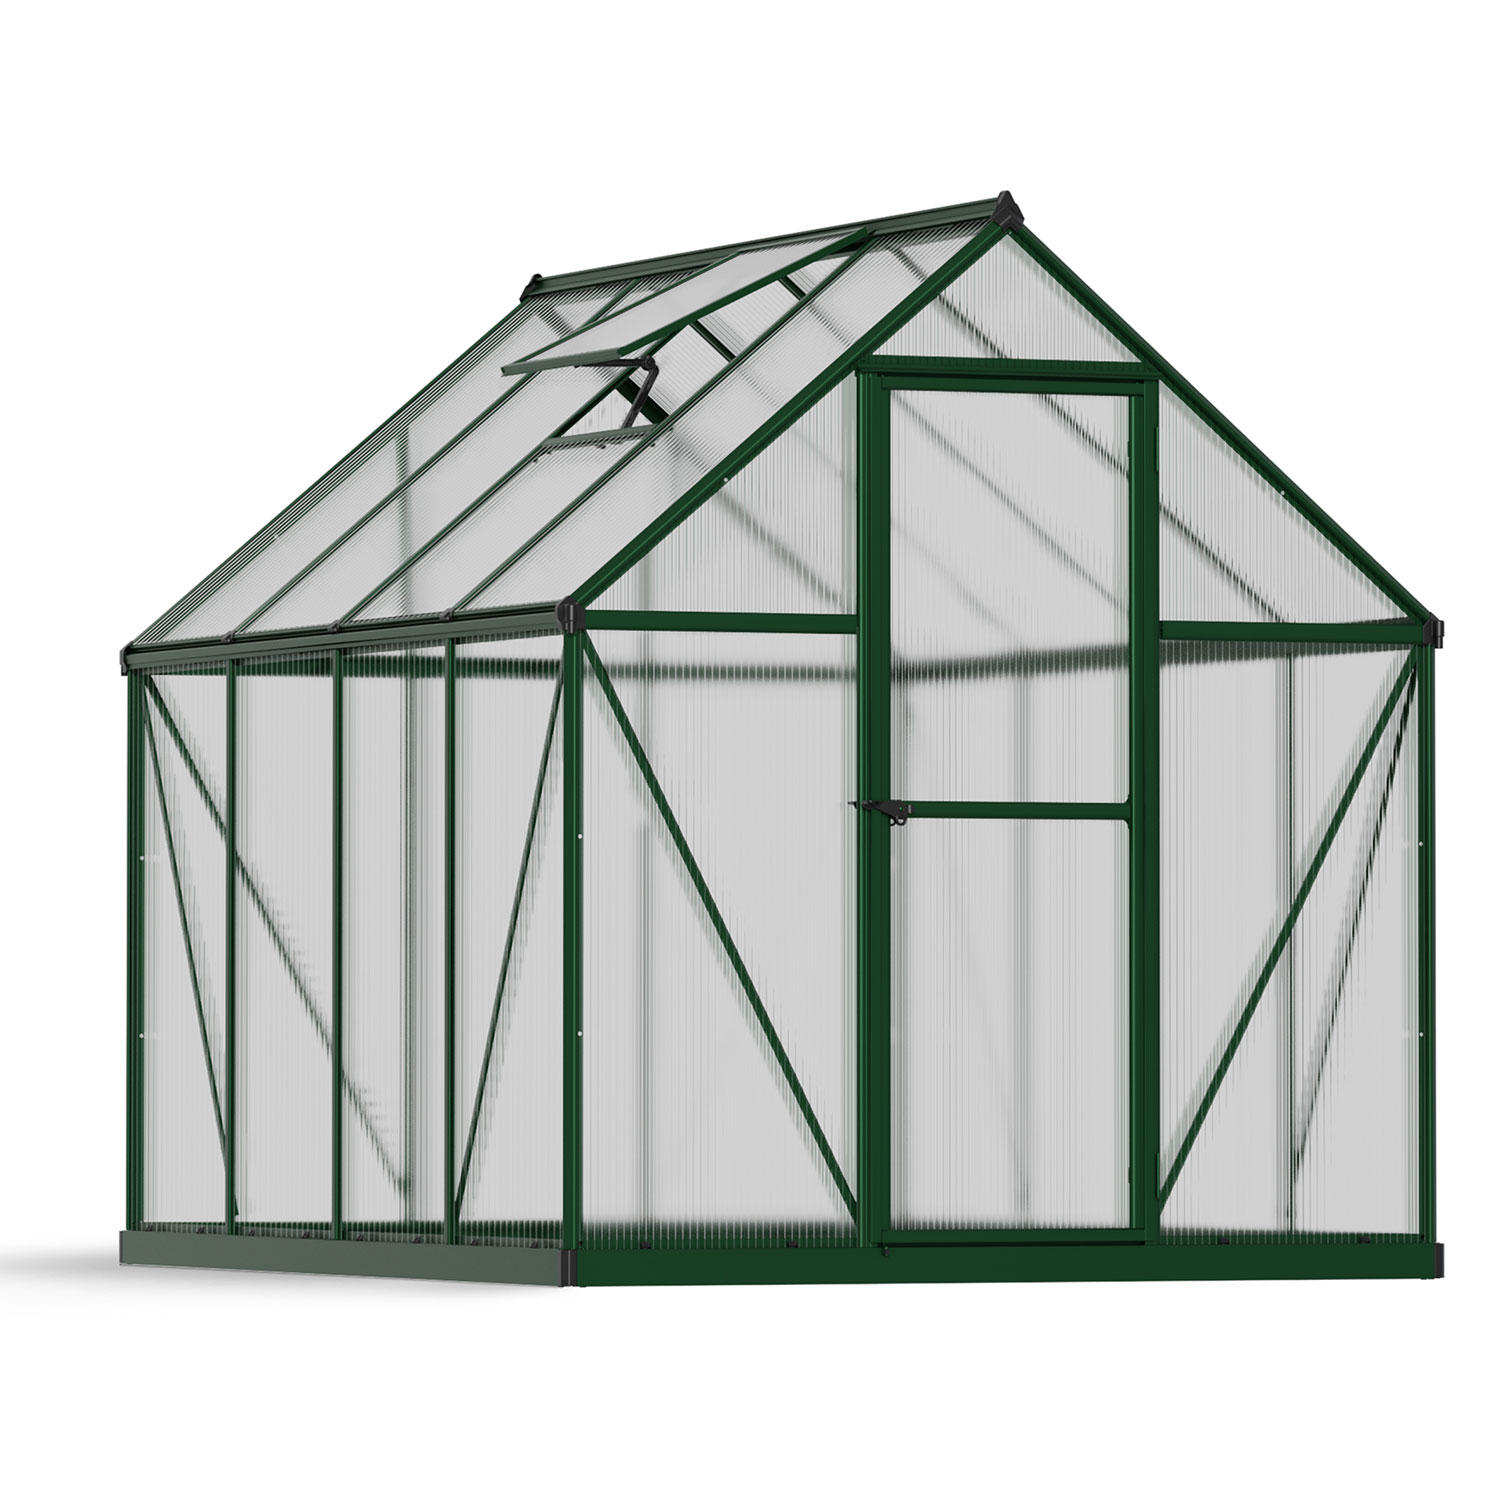 Photos - Greenhouses Canopia Palram Nature Mythos 6' x 8' Greenhouse - Green Frame - Twin-Wall HG5008G 